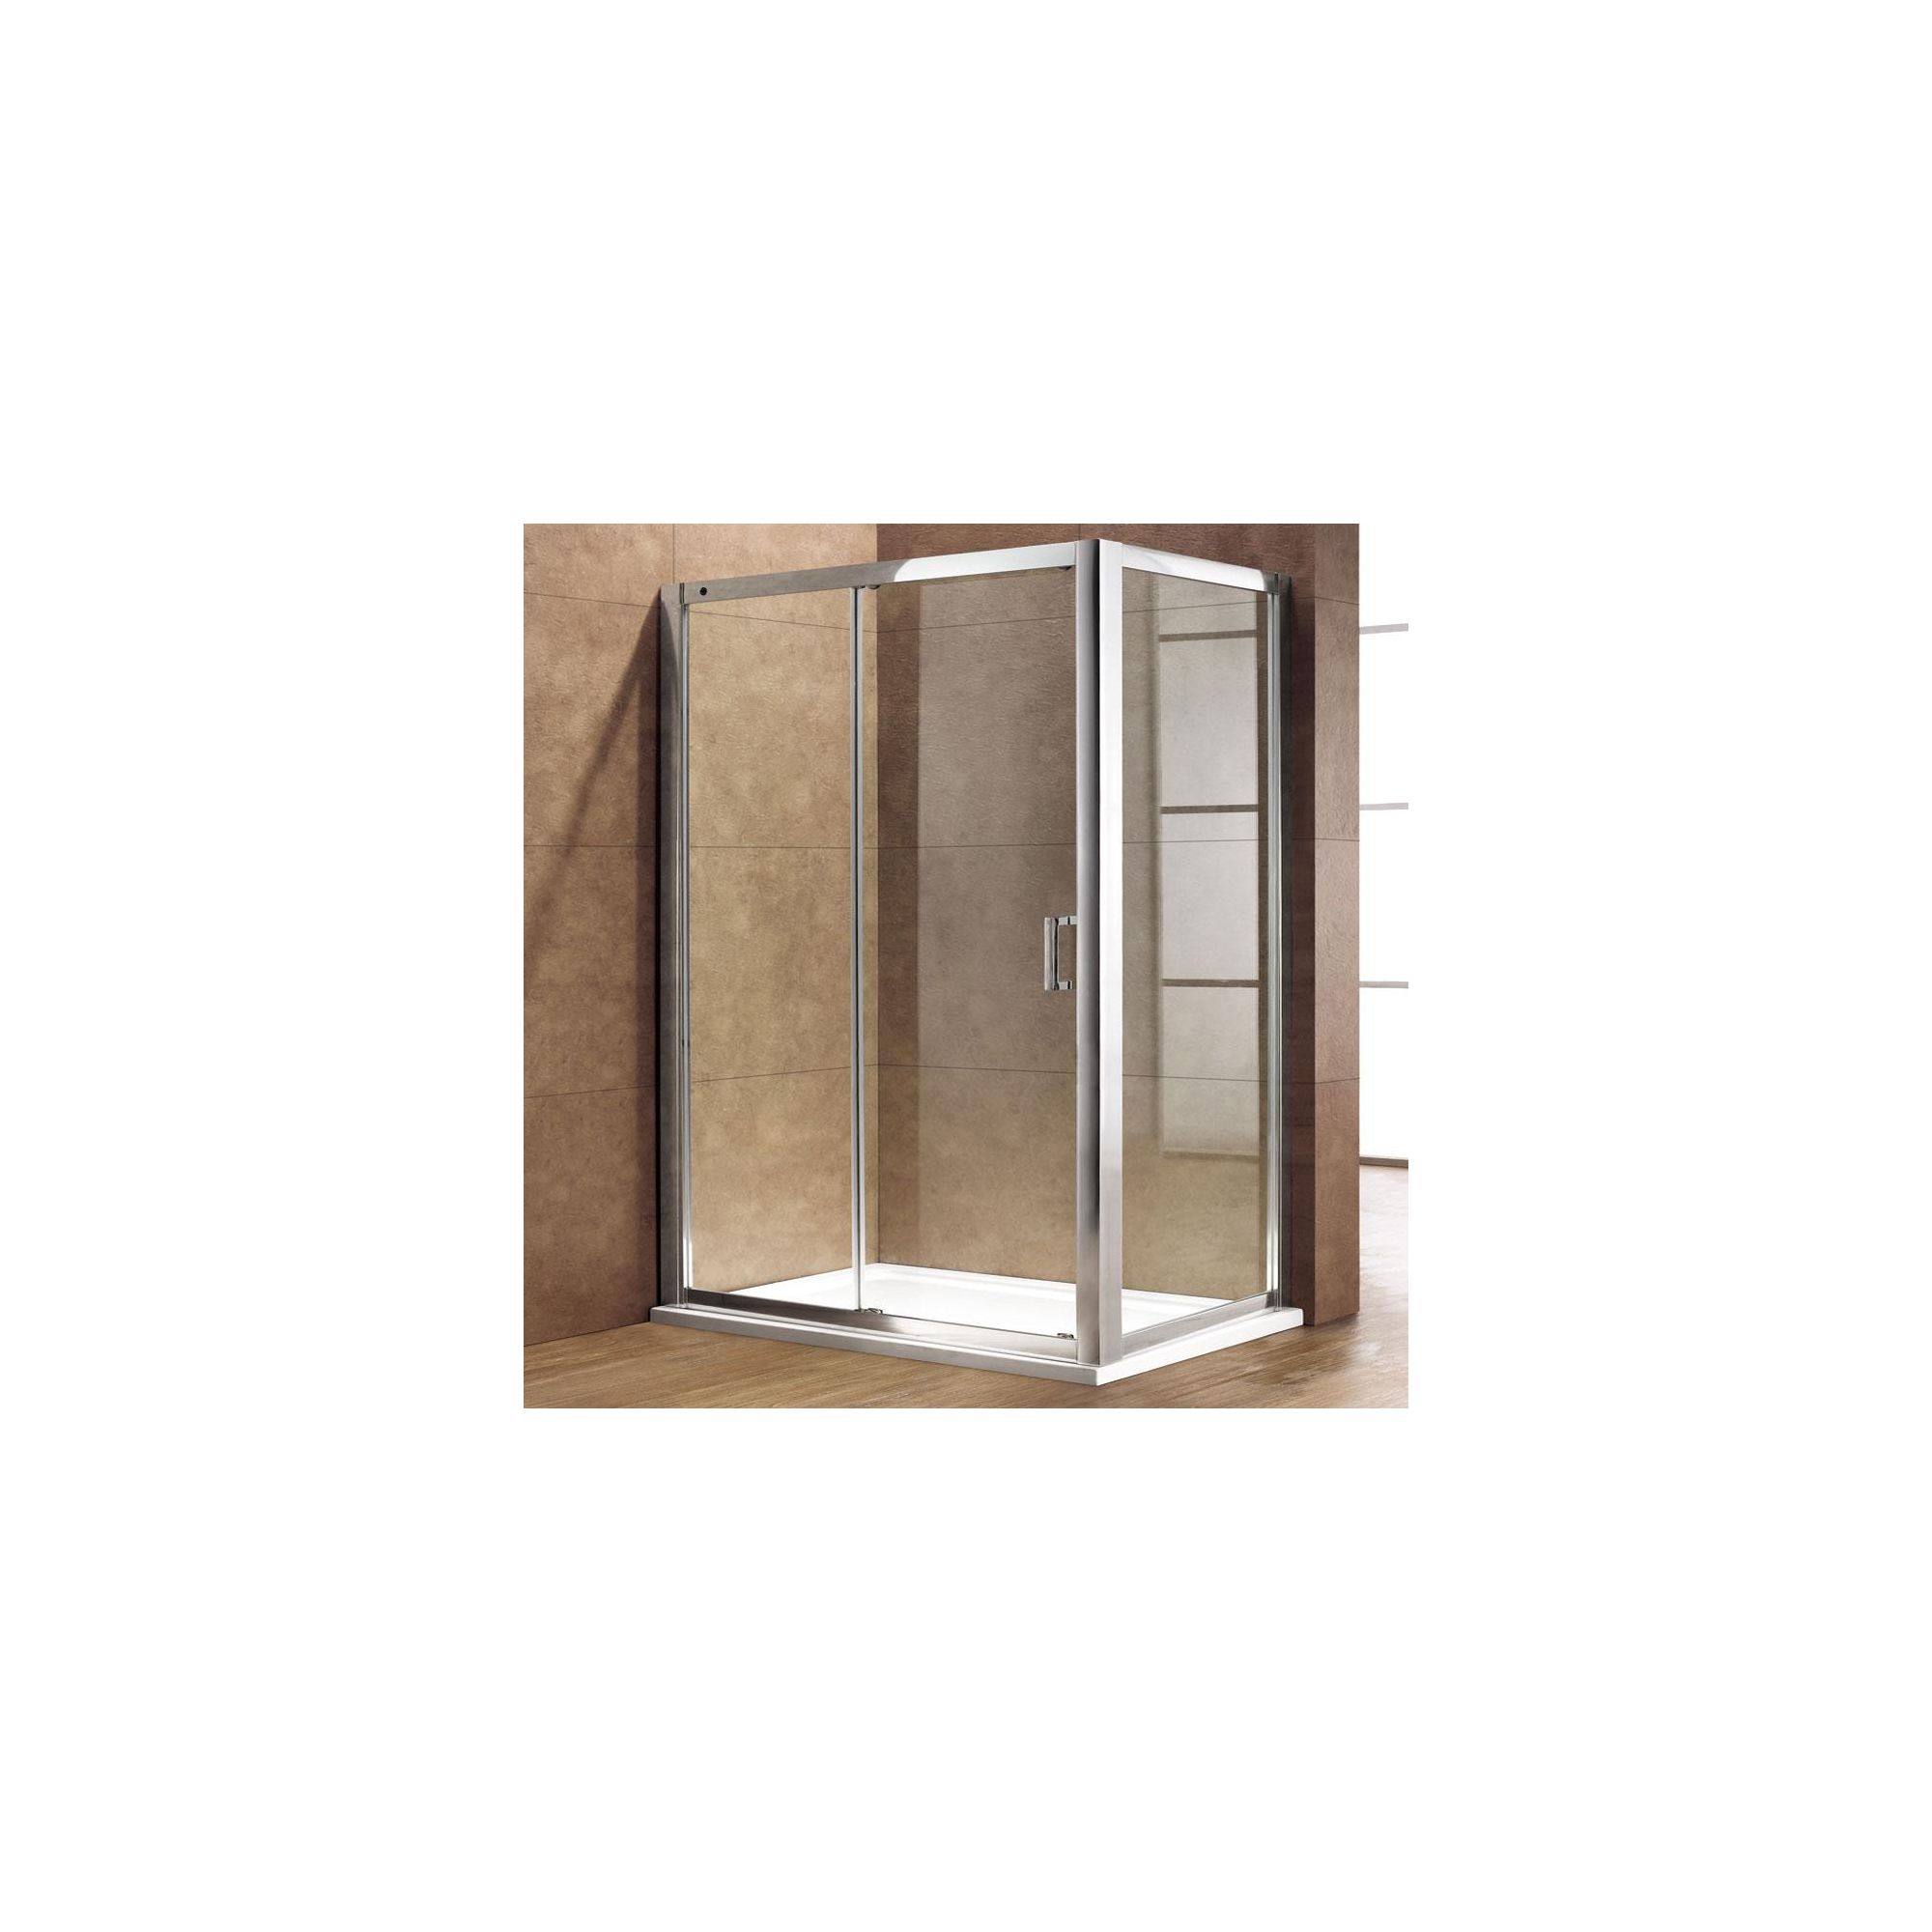 Duchy Premium Single Sliding Door Shower Enclosure, 1200mm x 900mm, 8mm Glass, Low Profile Tray at Tescos Direct